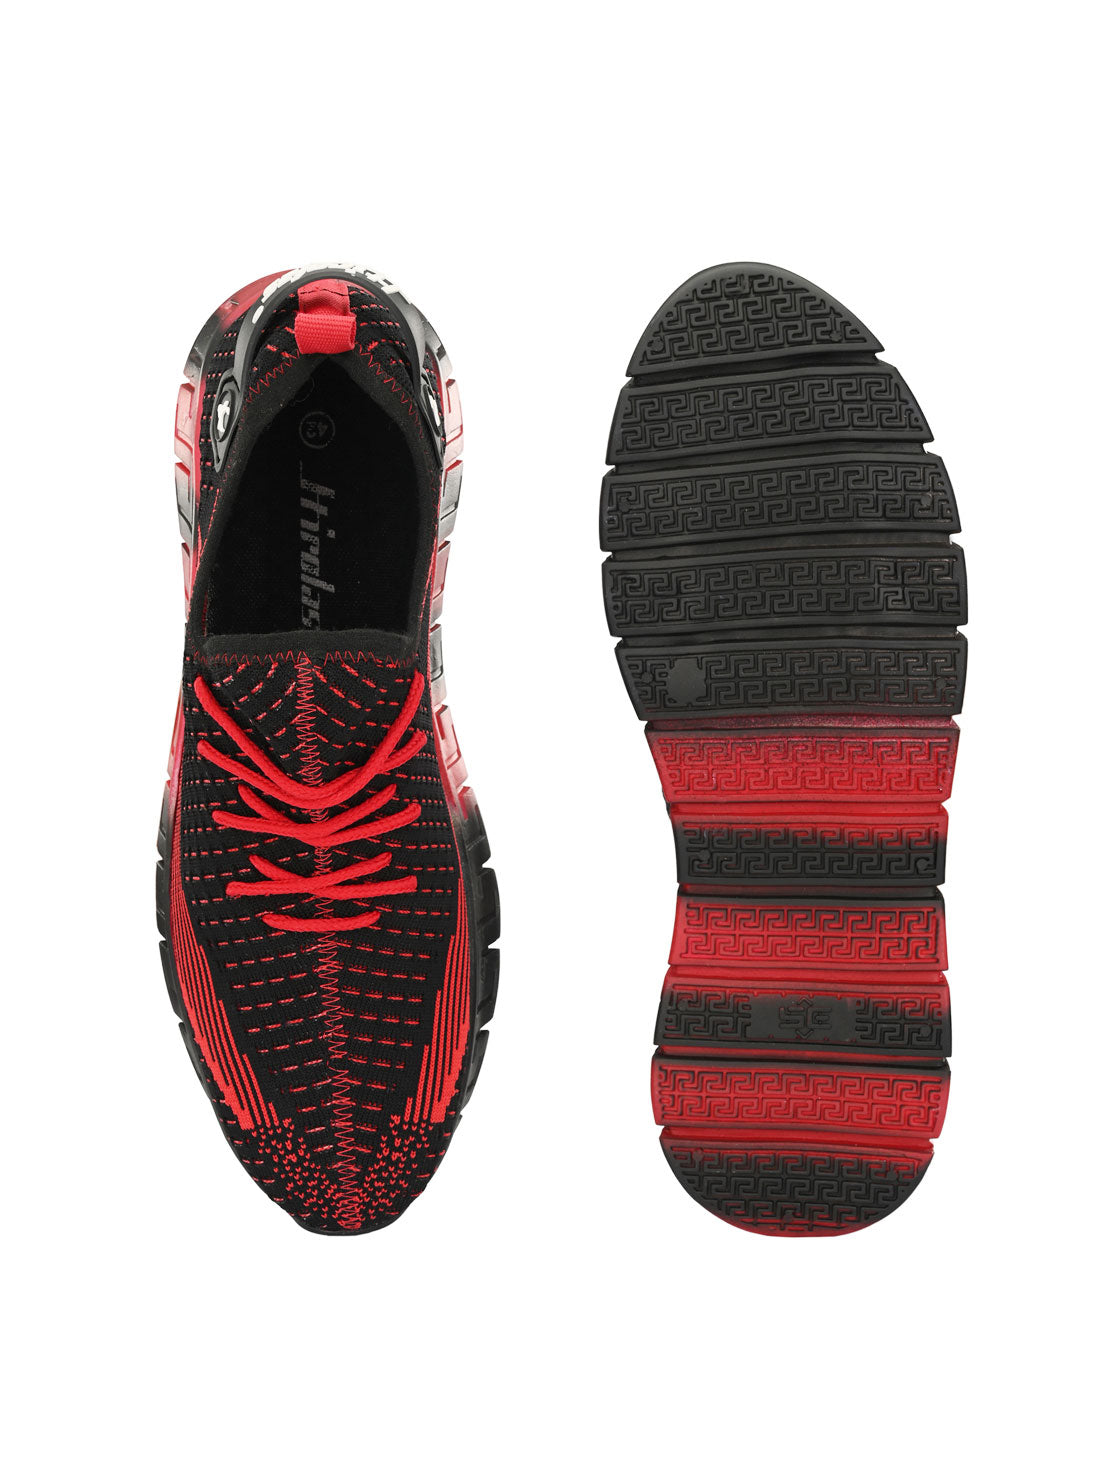 Hirolas® Men's Black/Red Knitted Athleisure Lace Up Sport Shoes (HRL2016BLR)